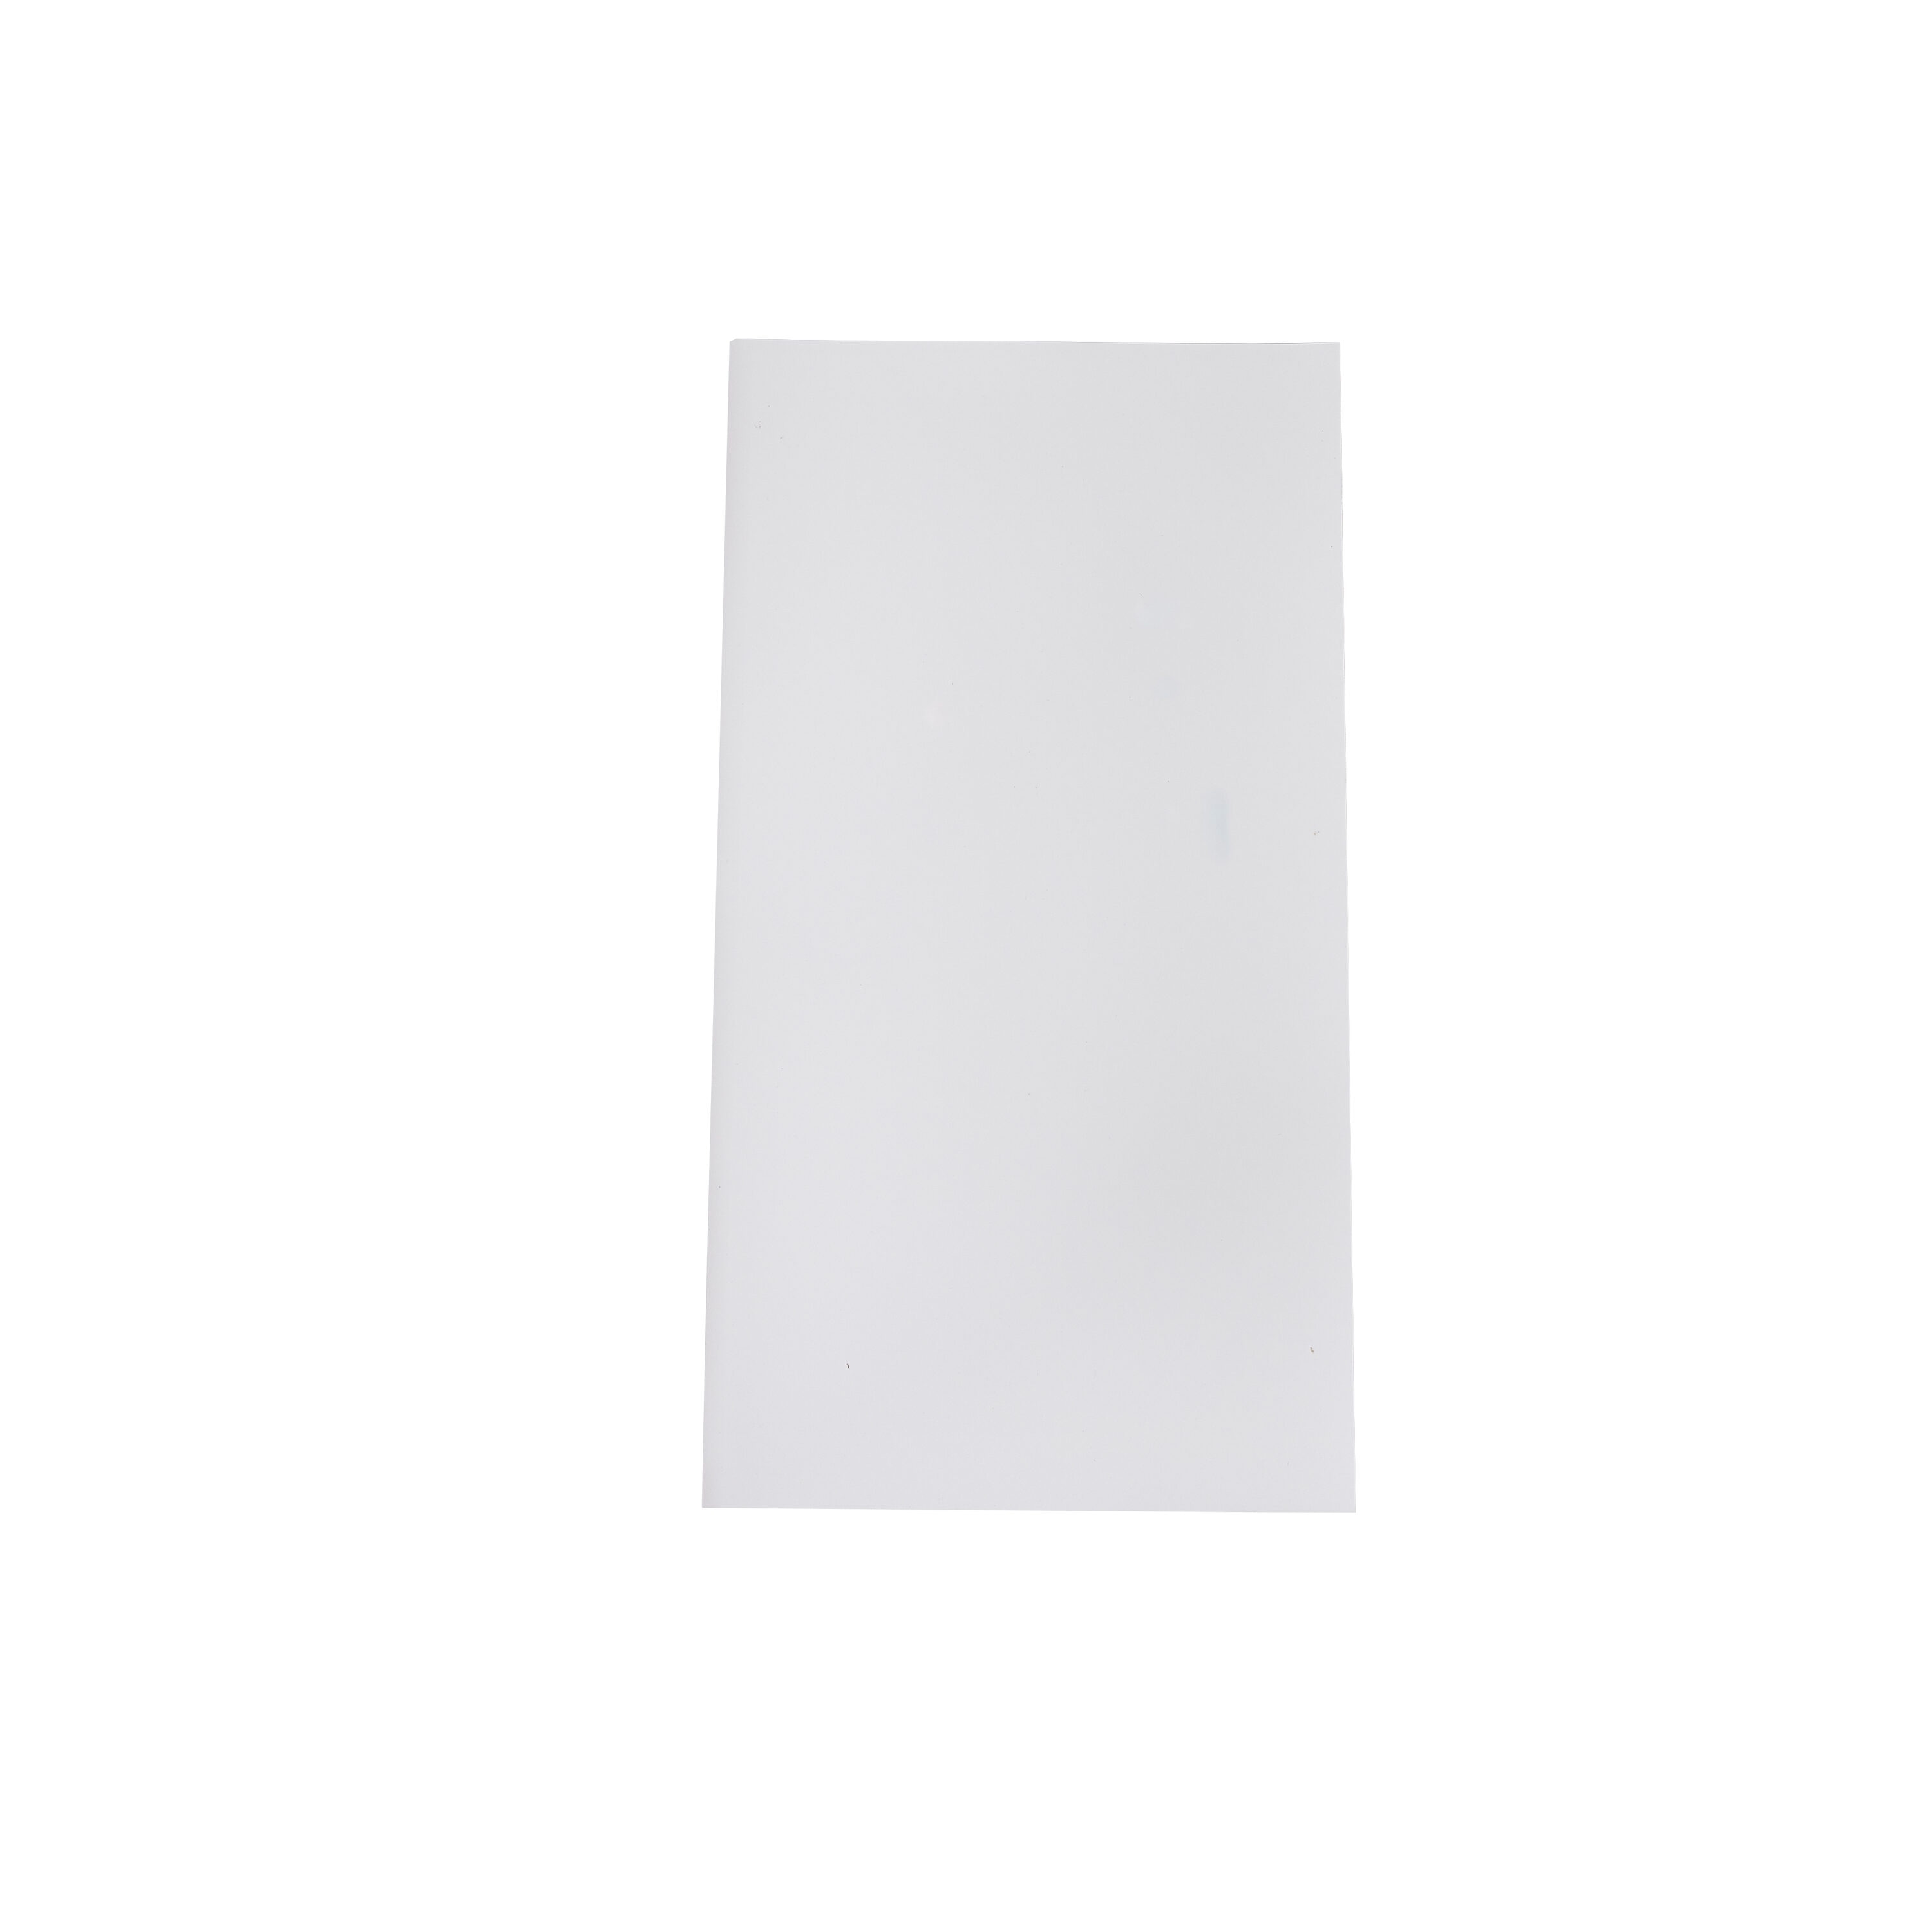 Frost King Magnetic Vent Covers for Wall, Floor or Ceiling, 5.5 inch Wide x 12 inch Long, White, Pack of 4 MC512WT